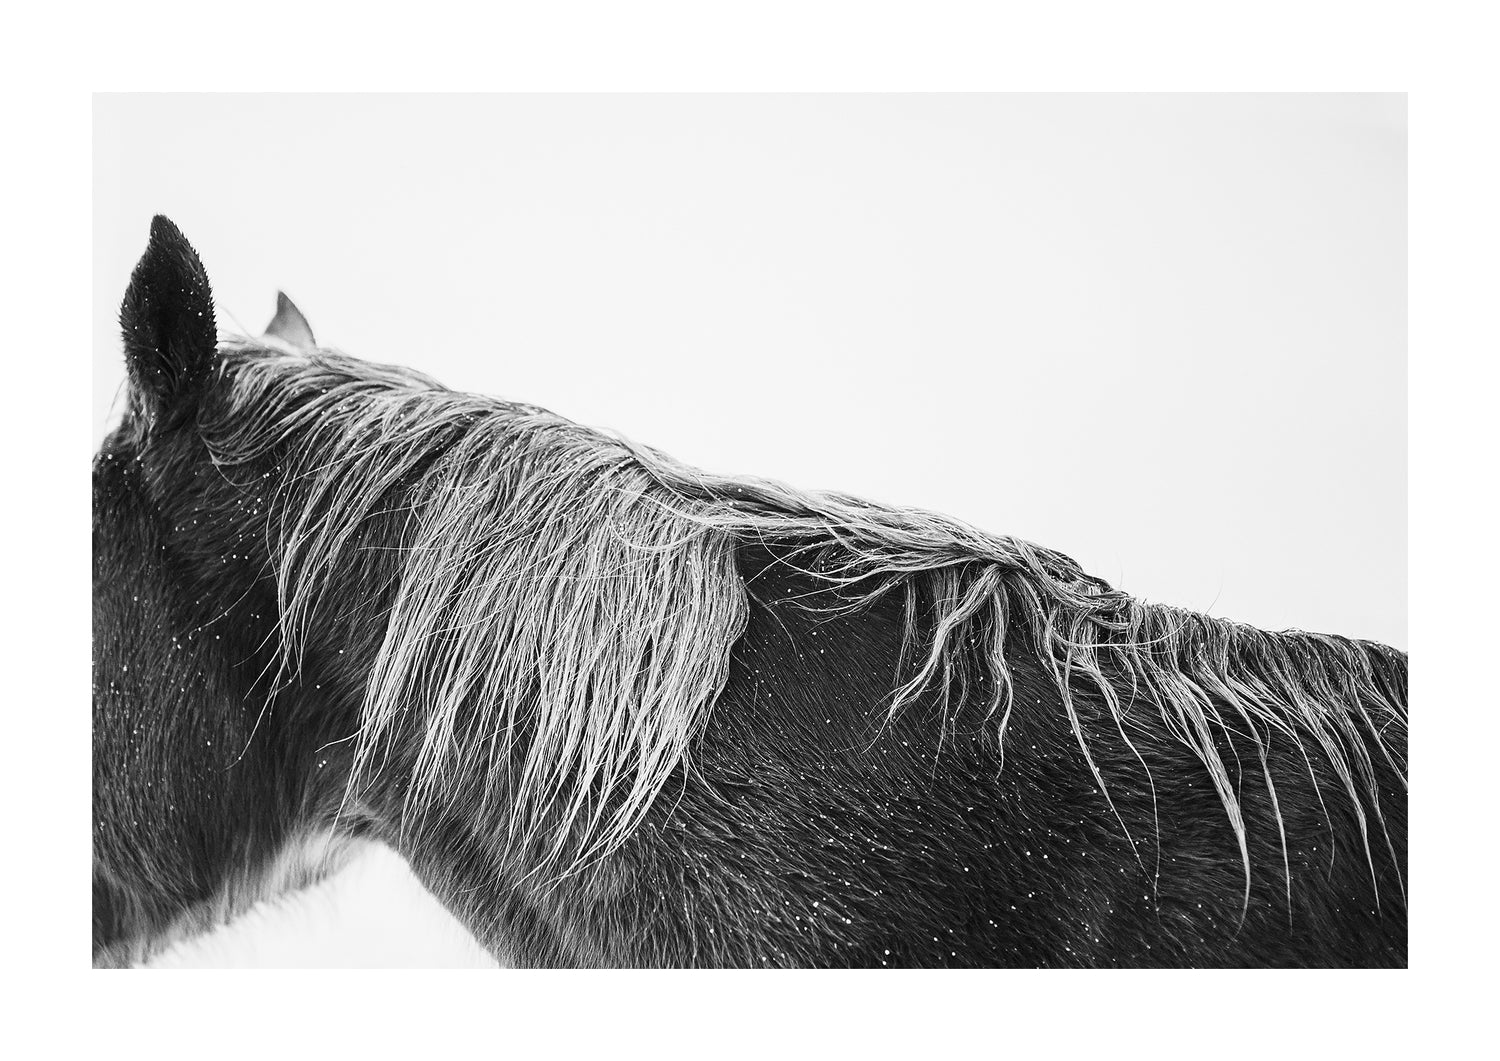 "Weathered" black and white photo of a horses mane in the snow